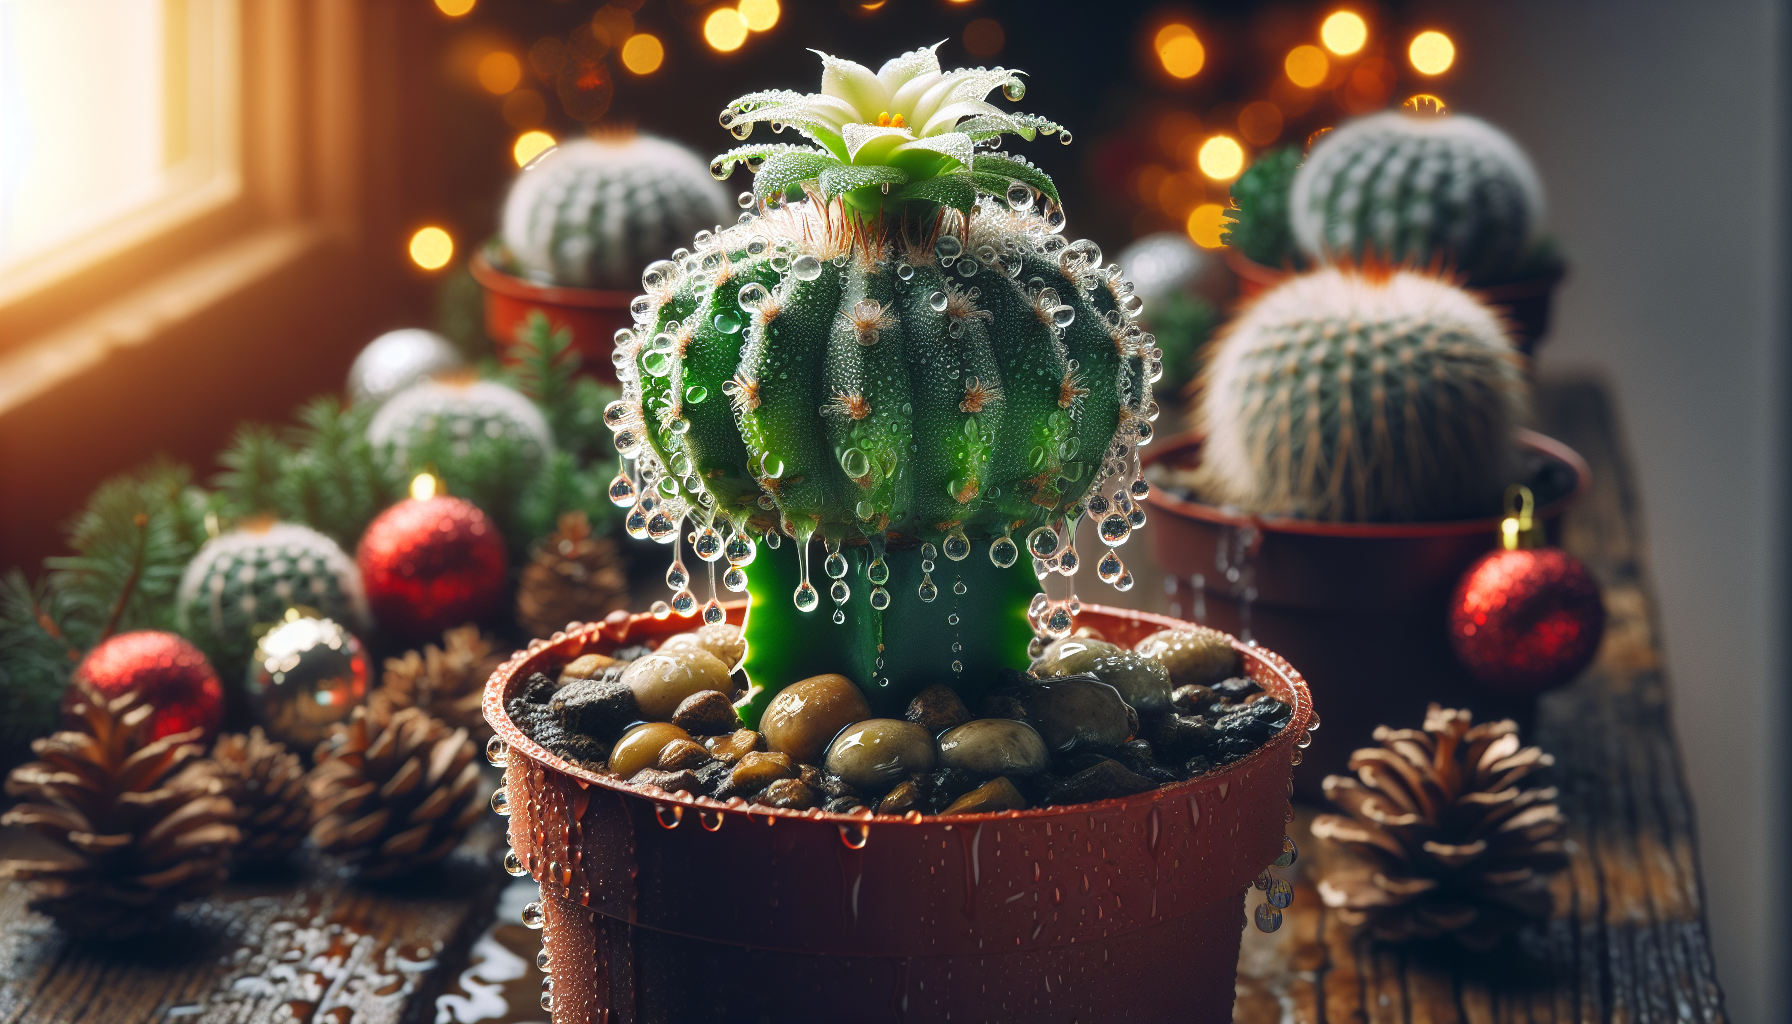 How often should you water a Christmas cactus